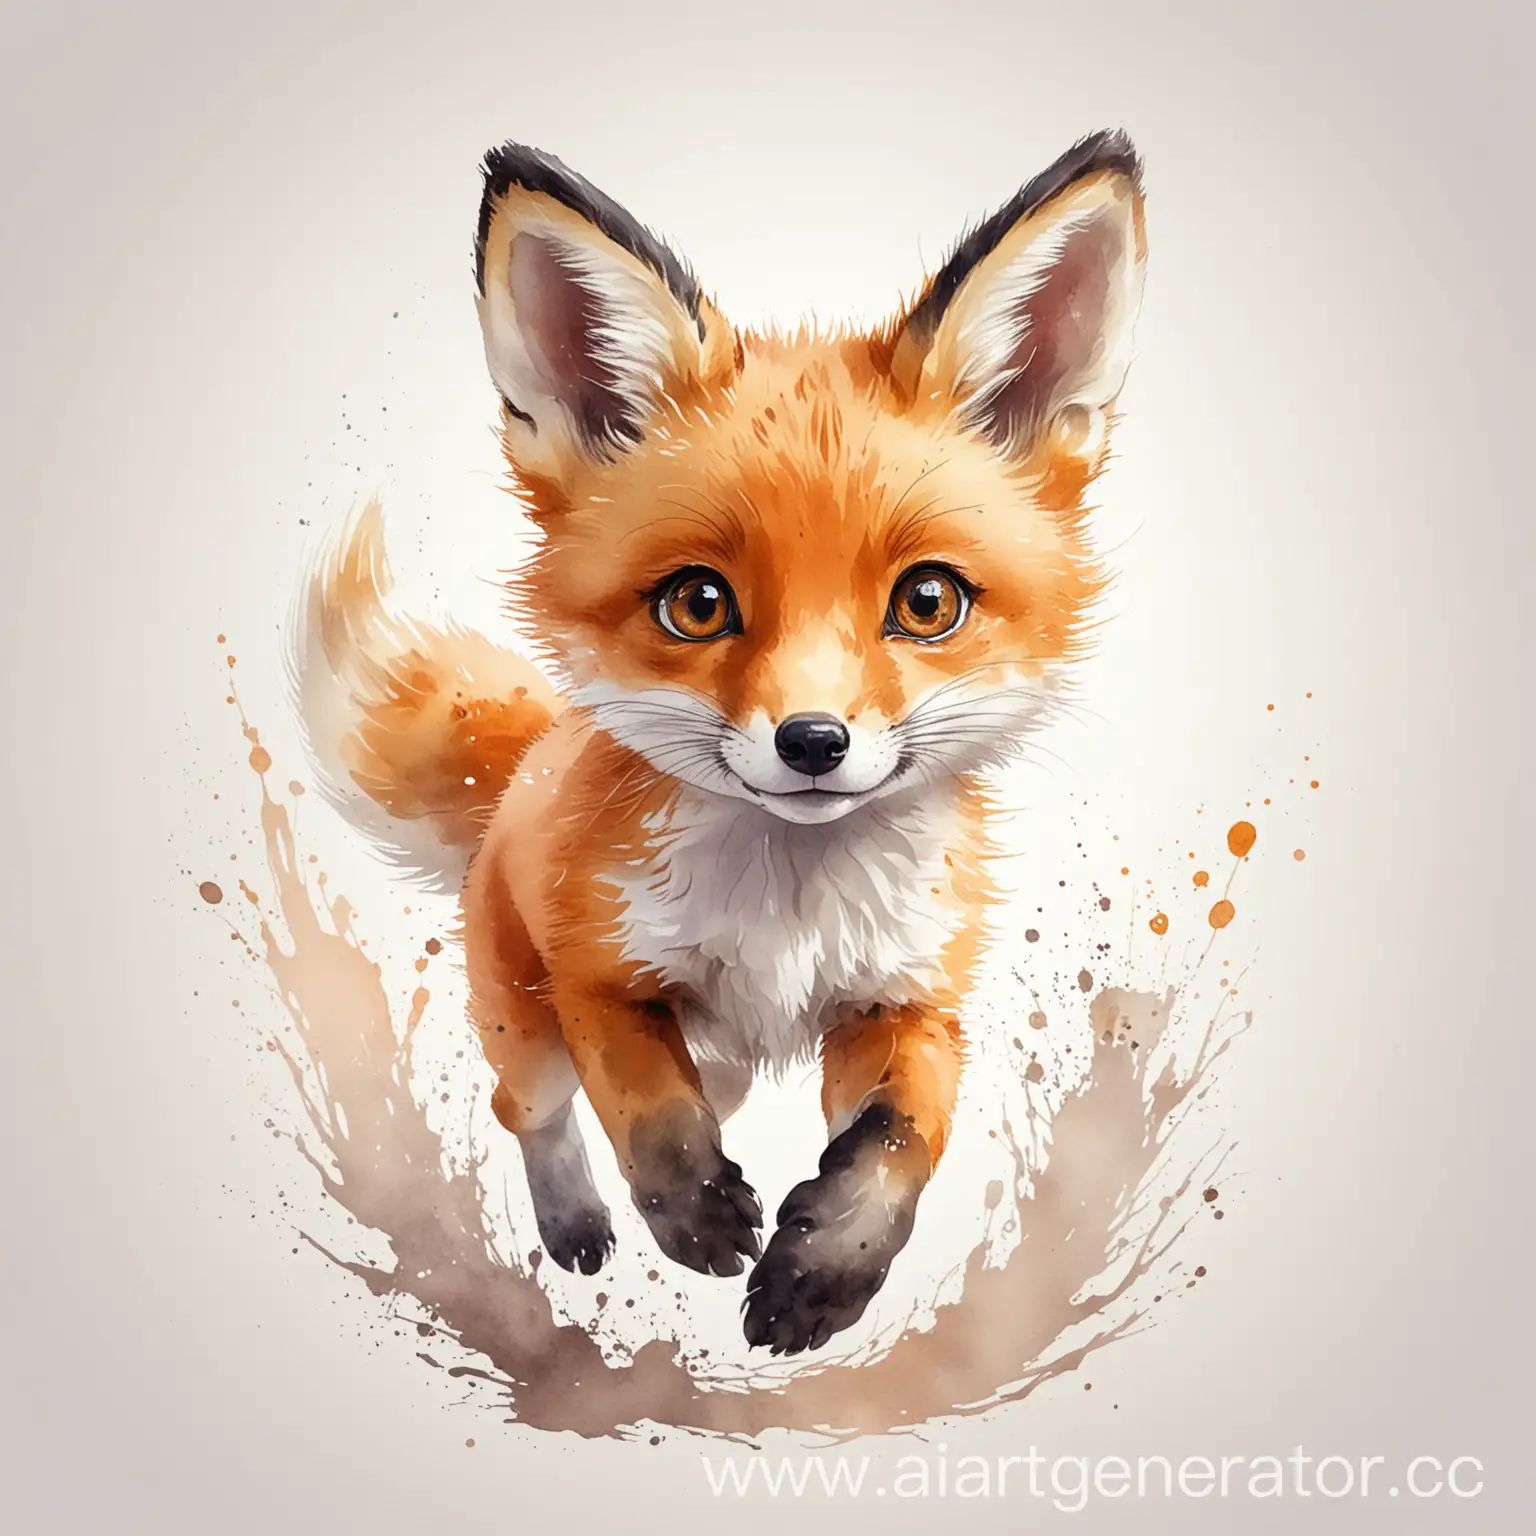 cartoonish little very cute baby face fox jumps with big eyes jumps in 45 degrees light watercolor white background mono color aquarel style effects